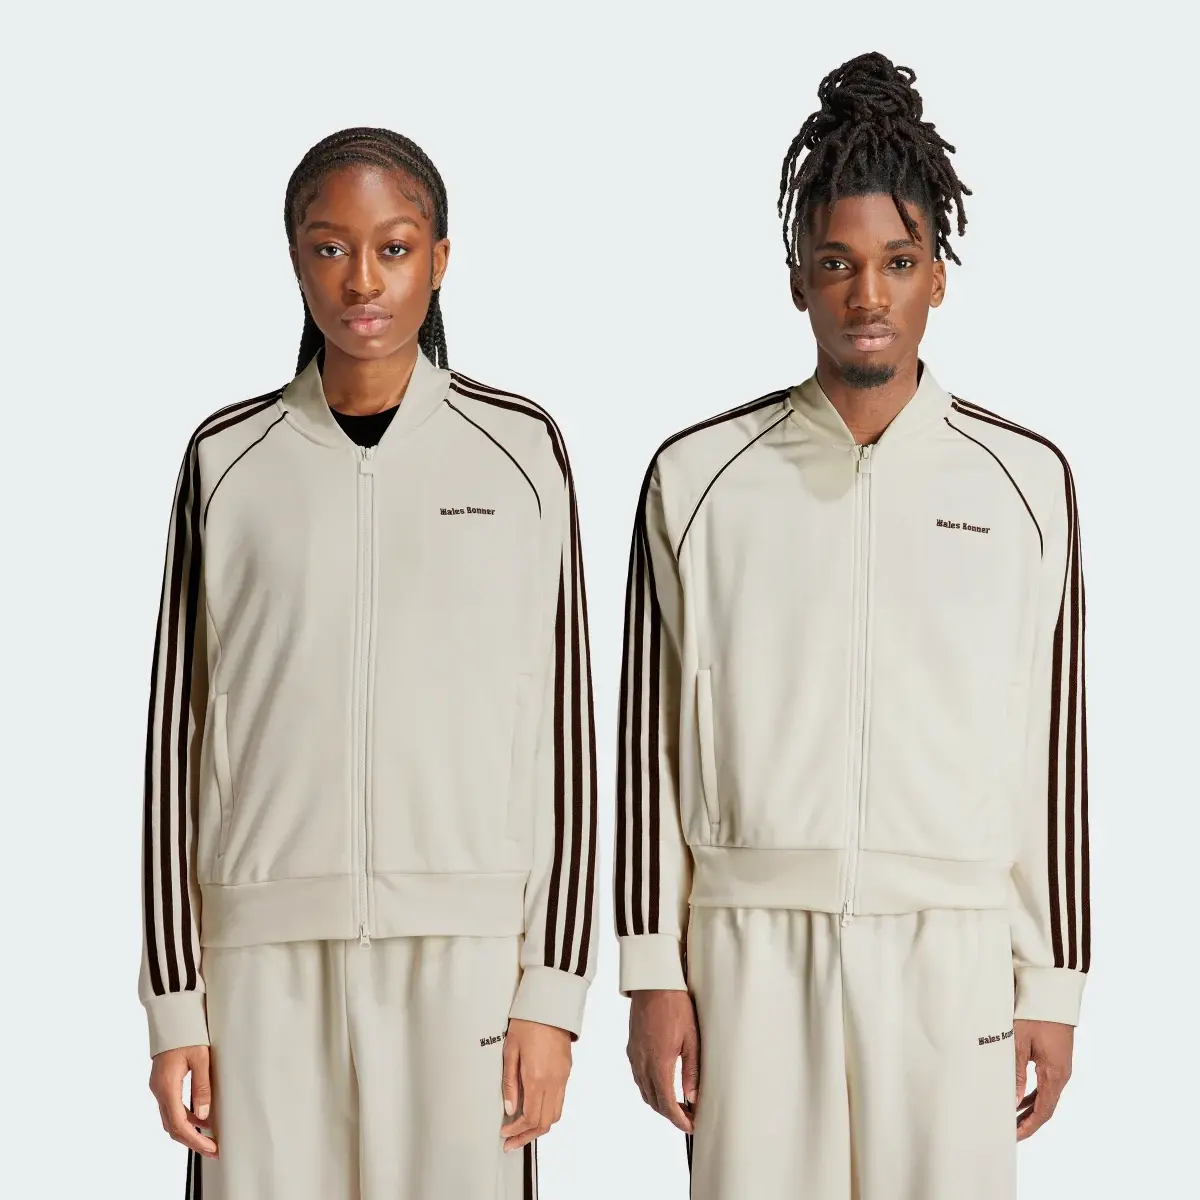 Adidas Wales Bonner Statement Track Top. 1